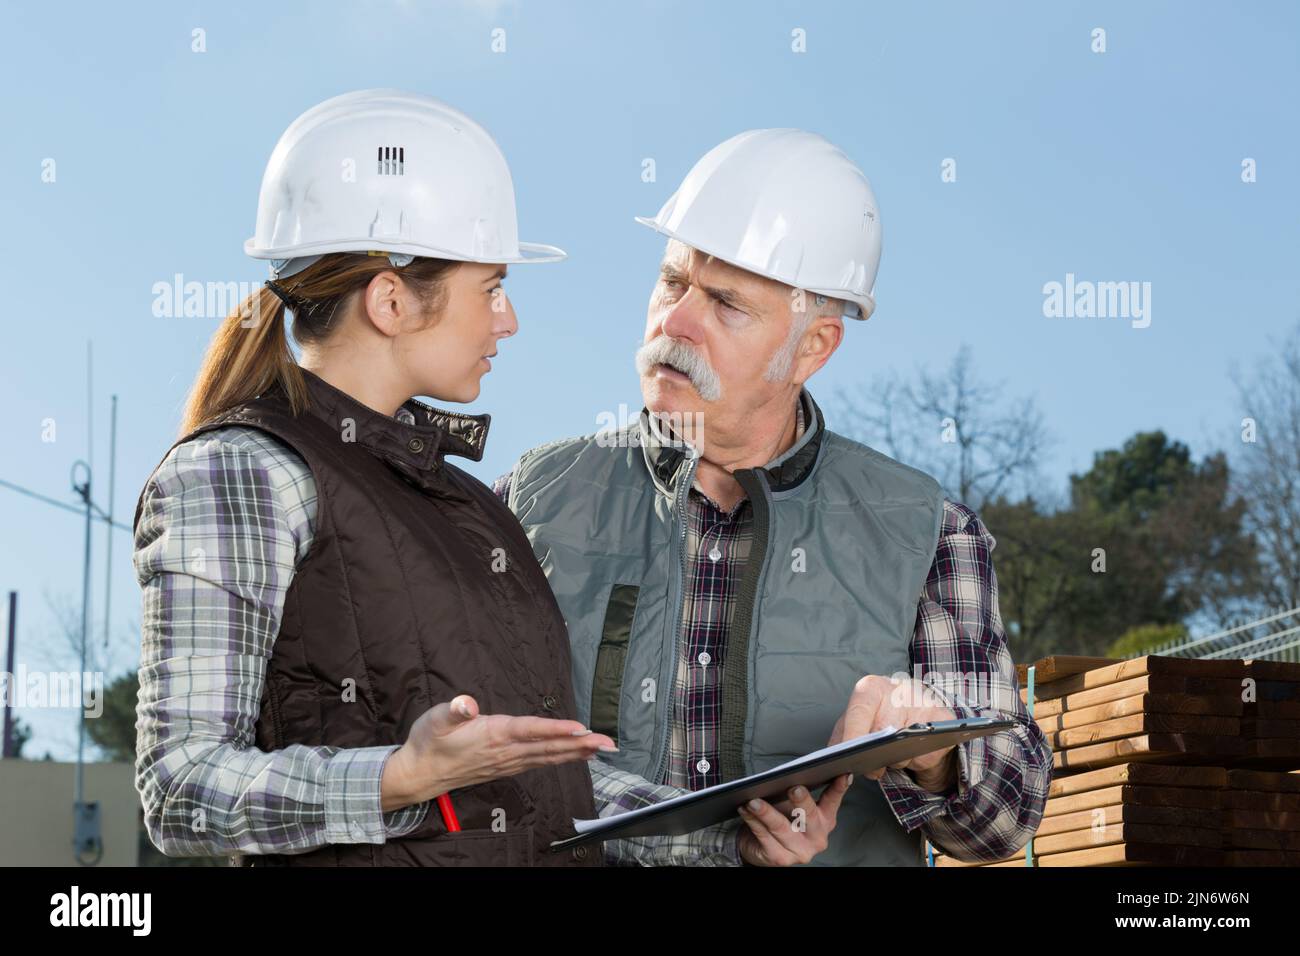 man and woman alking in hard hats Stock Photo